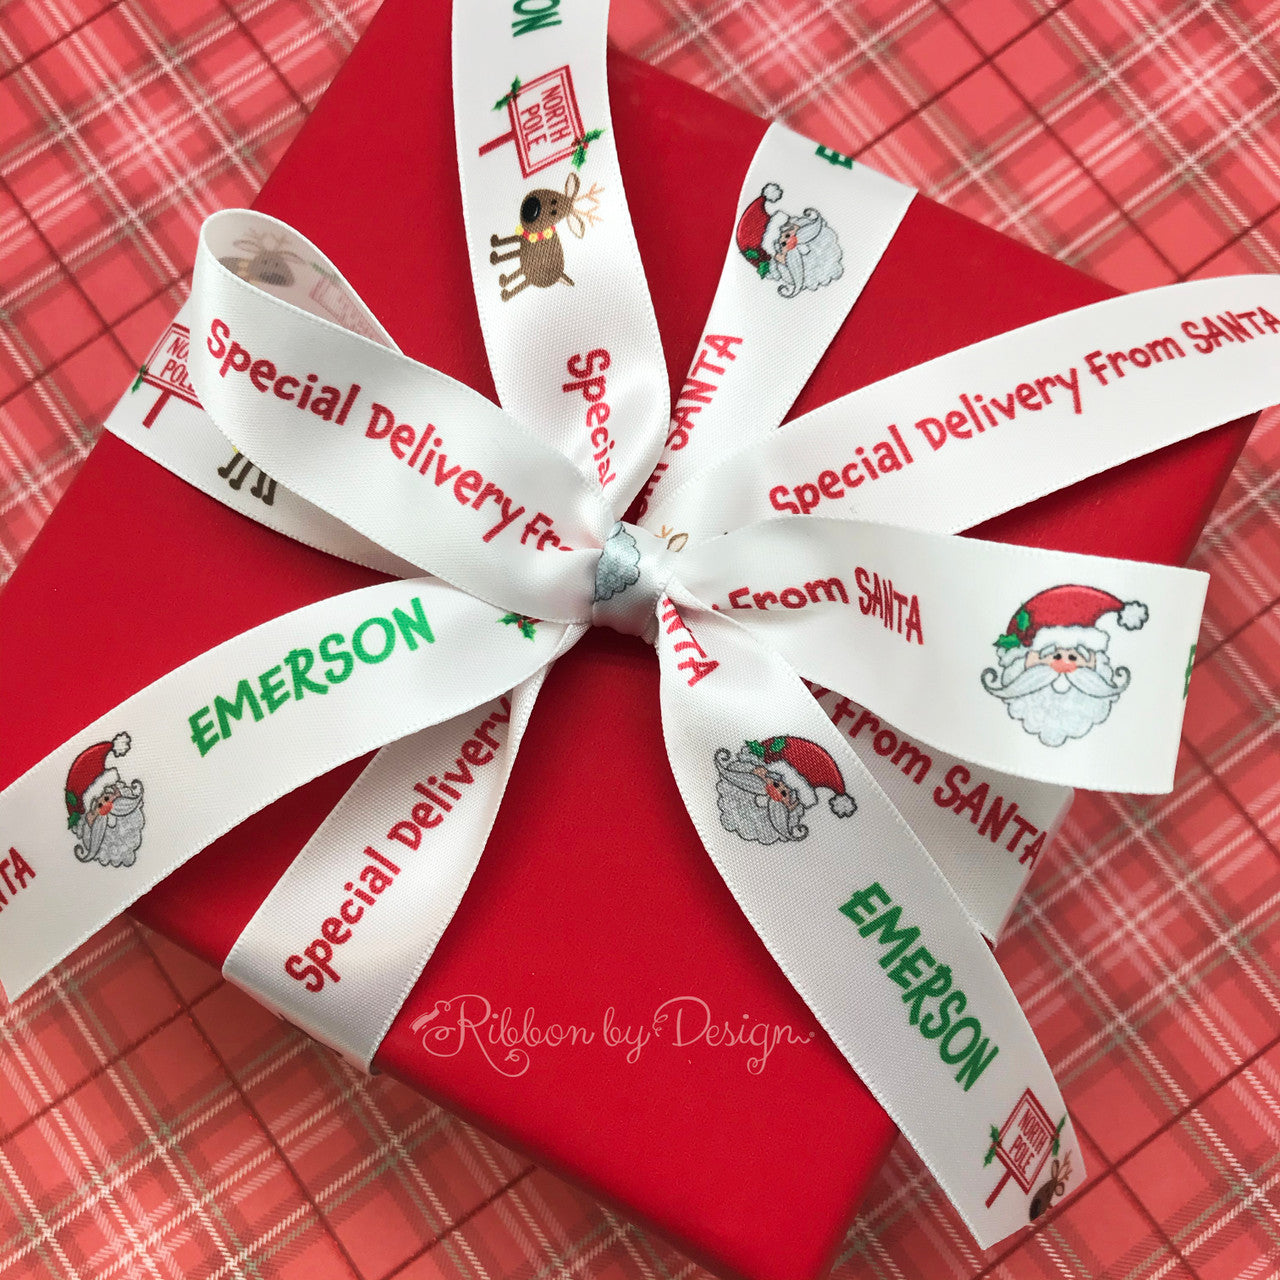 Personalized ribbon featuring any child's name with Special Delivery from Santa along with Santa's Face, a reindeer and North Pole sign printed on 7/8" white single face satin  will make Christmas morning even more magical for those who truly believe!  Make this ribbon part of any child's magical moment! All our ribbon is designed and printed in the USA